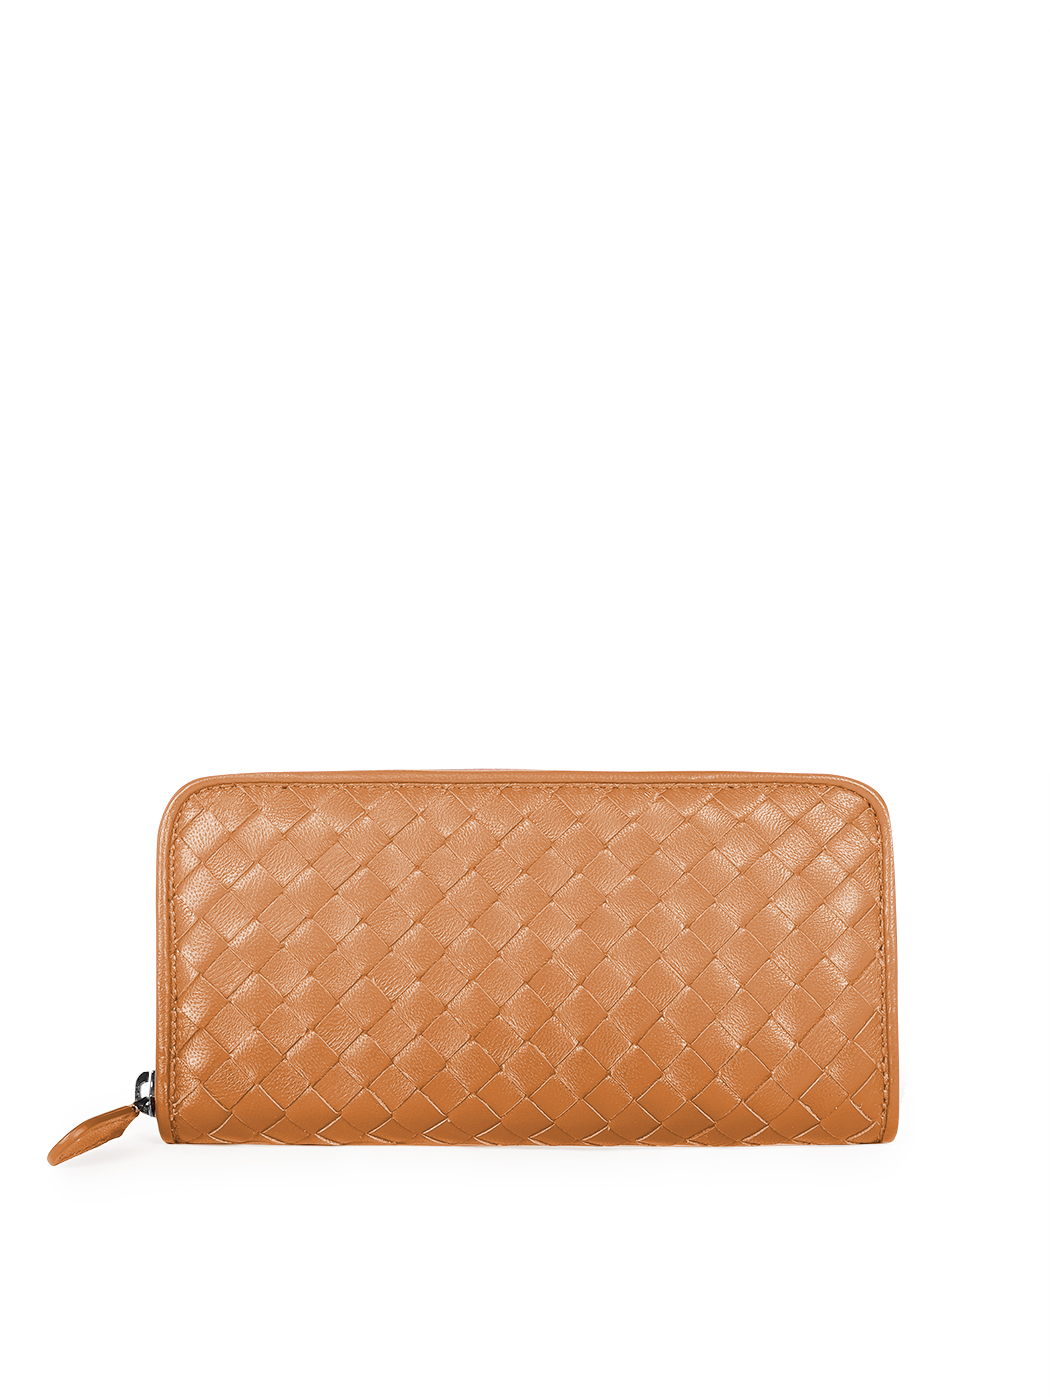 Long zip-around wallet in tan woven leather